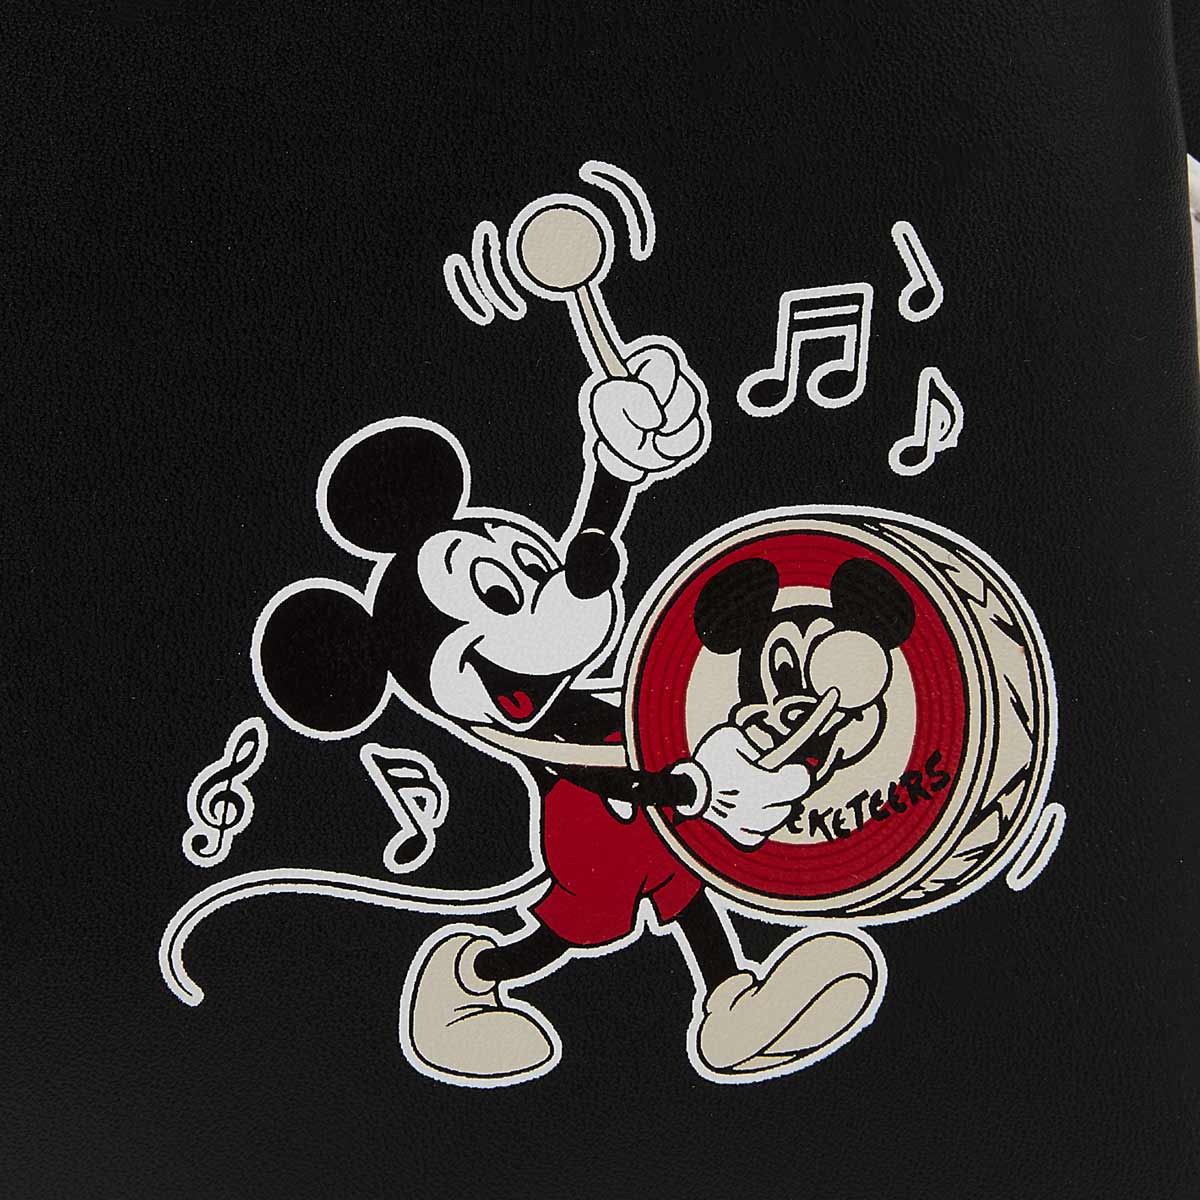 Loungefly x Disney 100th Mickey Mouse Club Mini Backpack - GeekCore